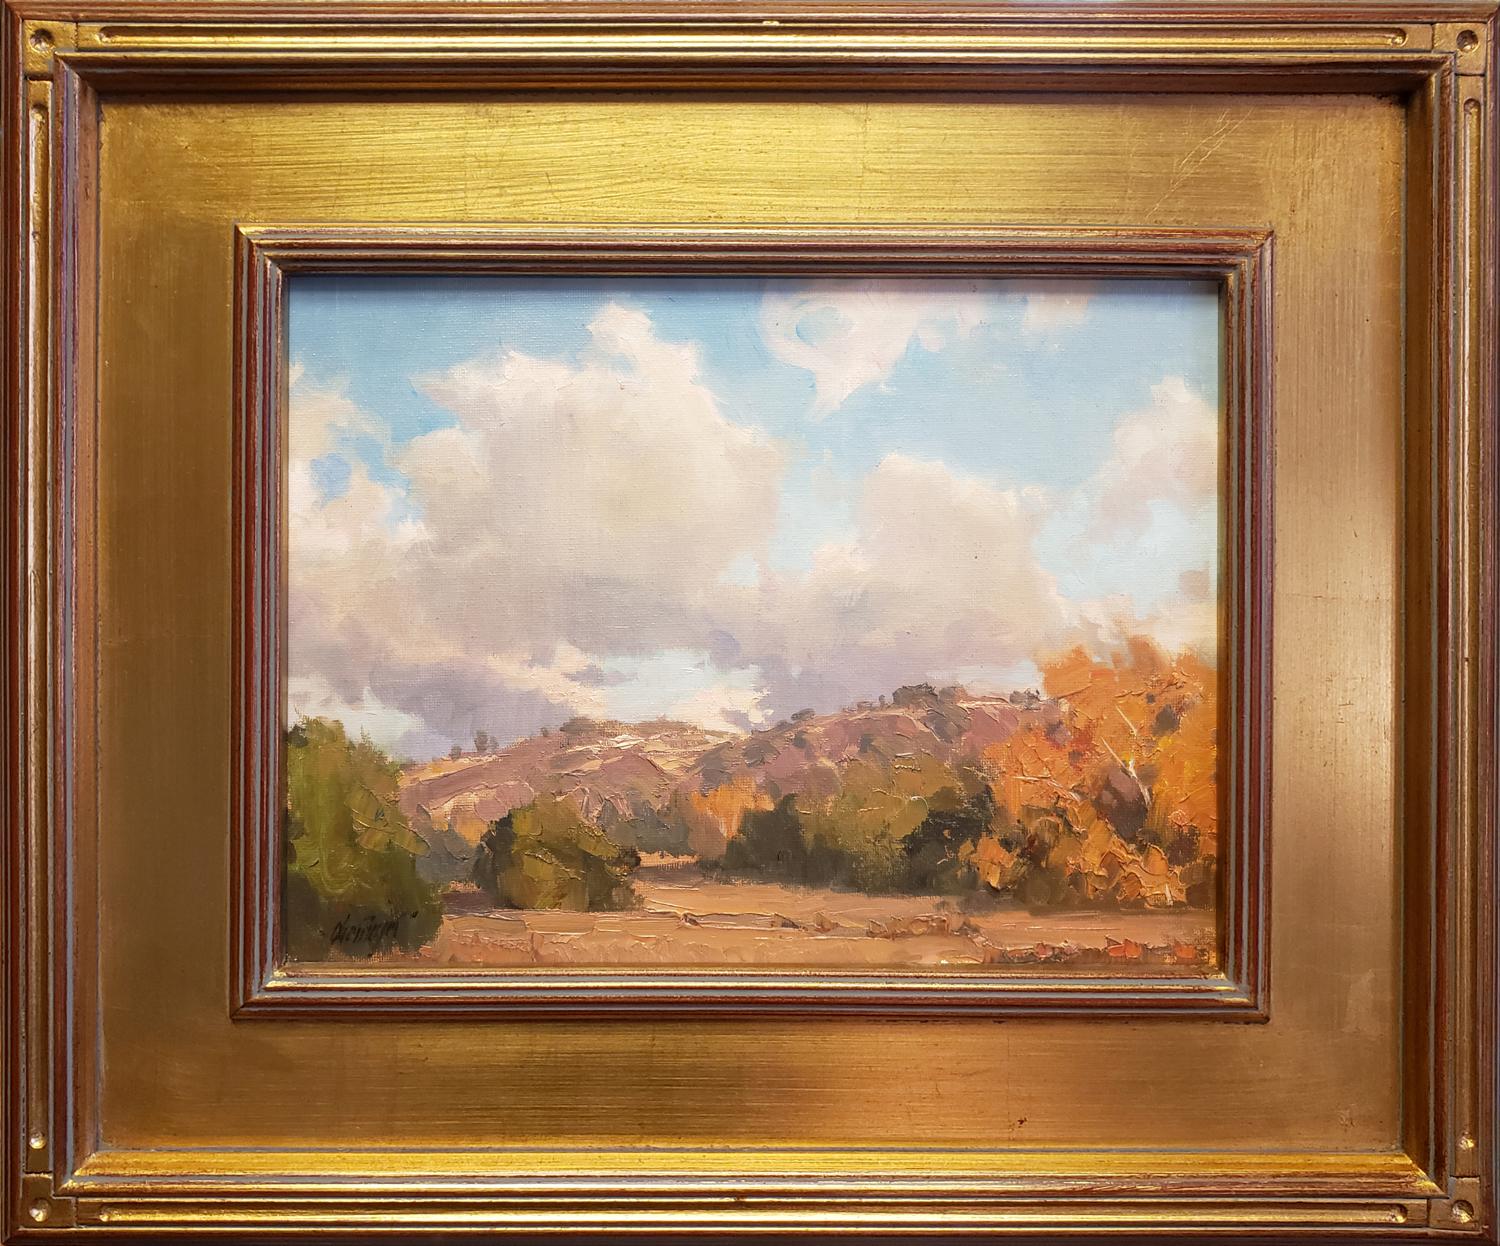 Departure; Laguna Canyon - Painting by Michael Obermeyer